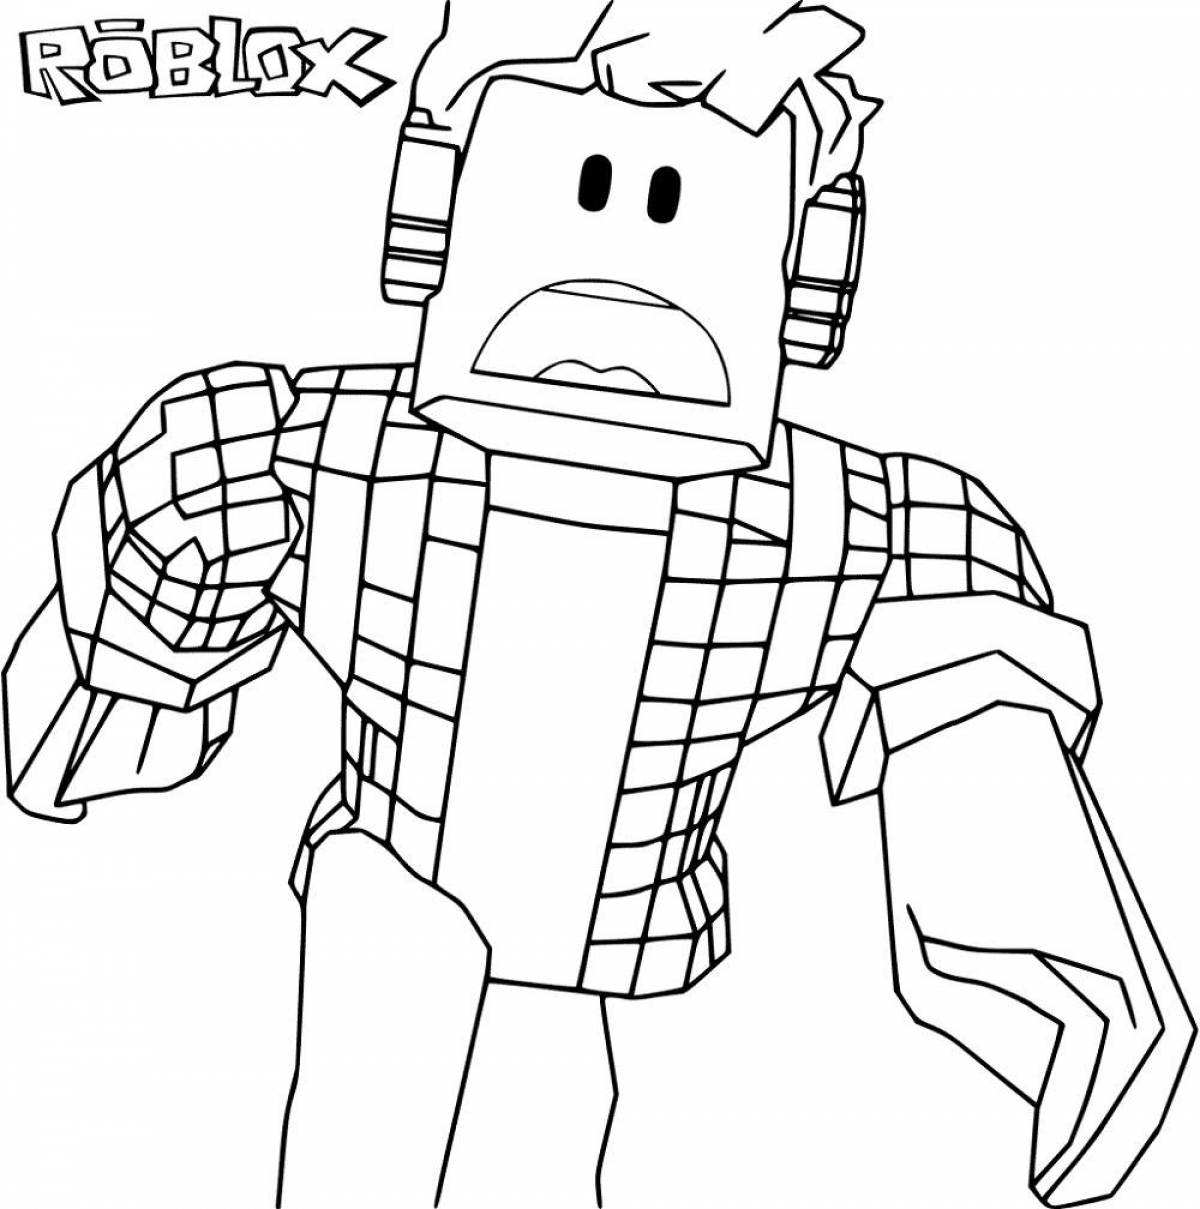 Playful roblox skins coloring page